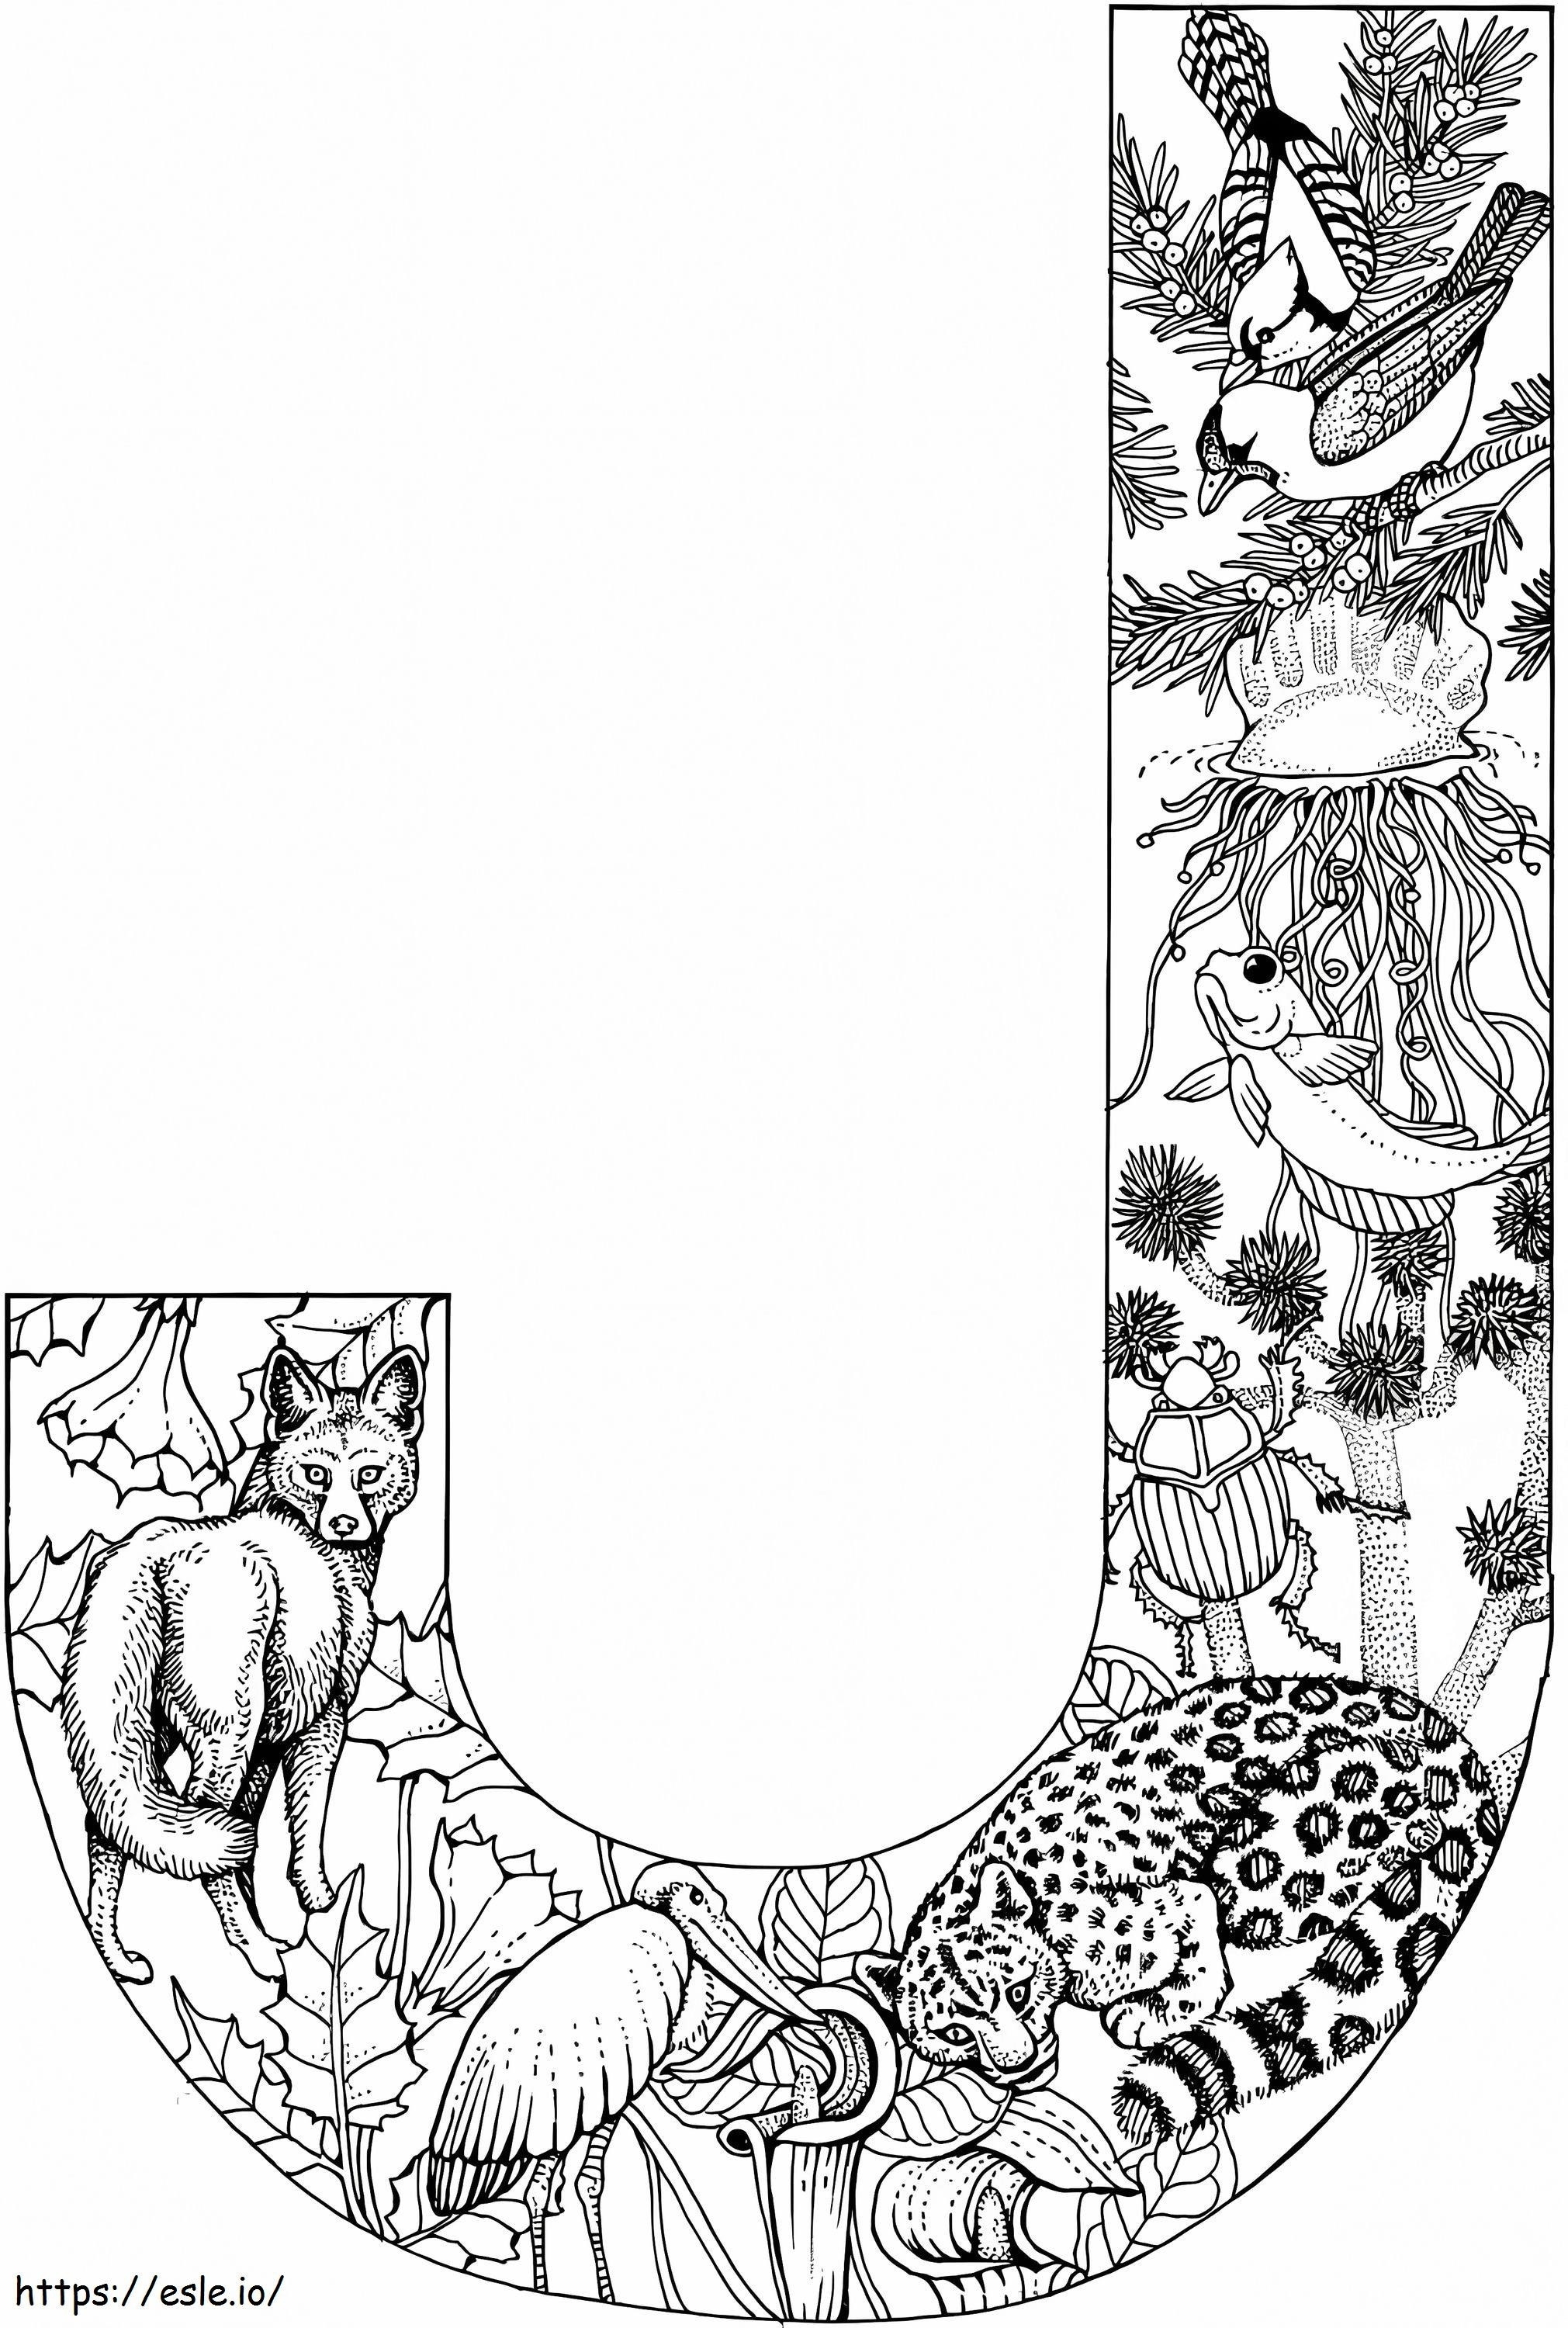 Letter J 6 coloring page